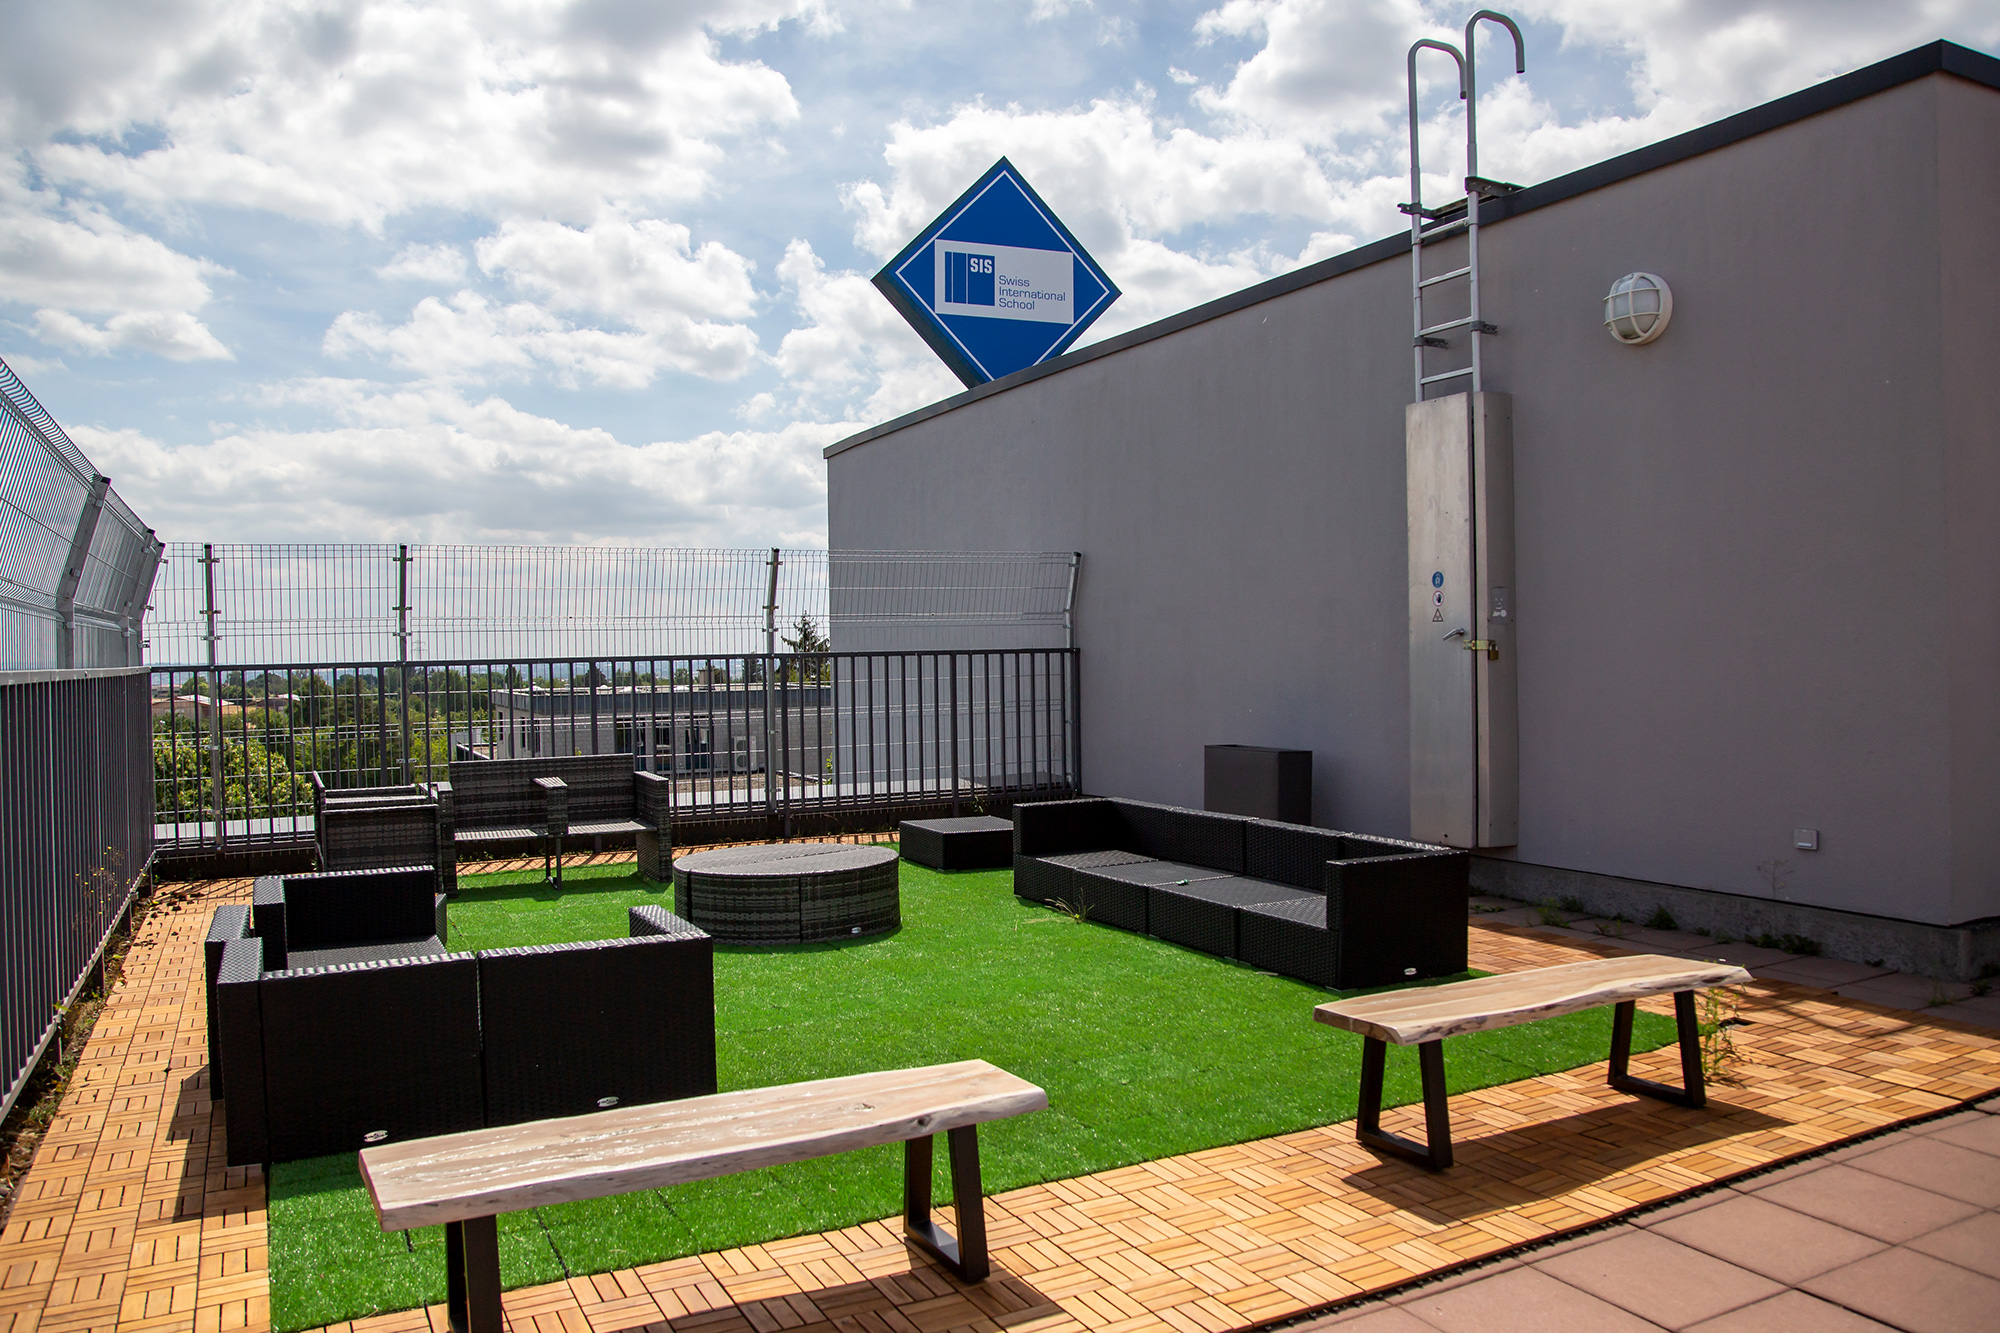 The roof terrace with a green field and benches on it.